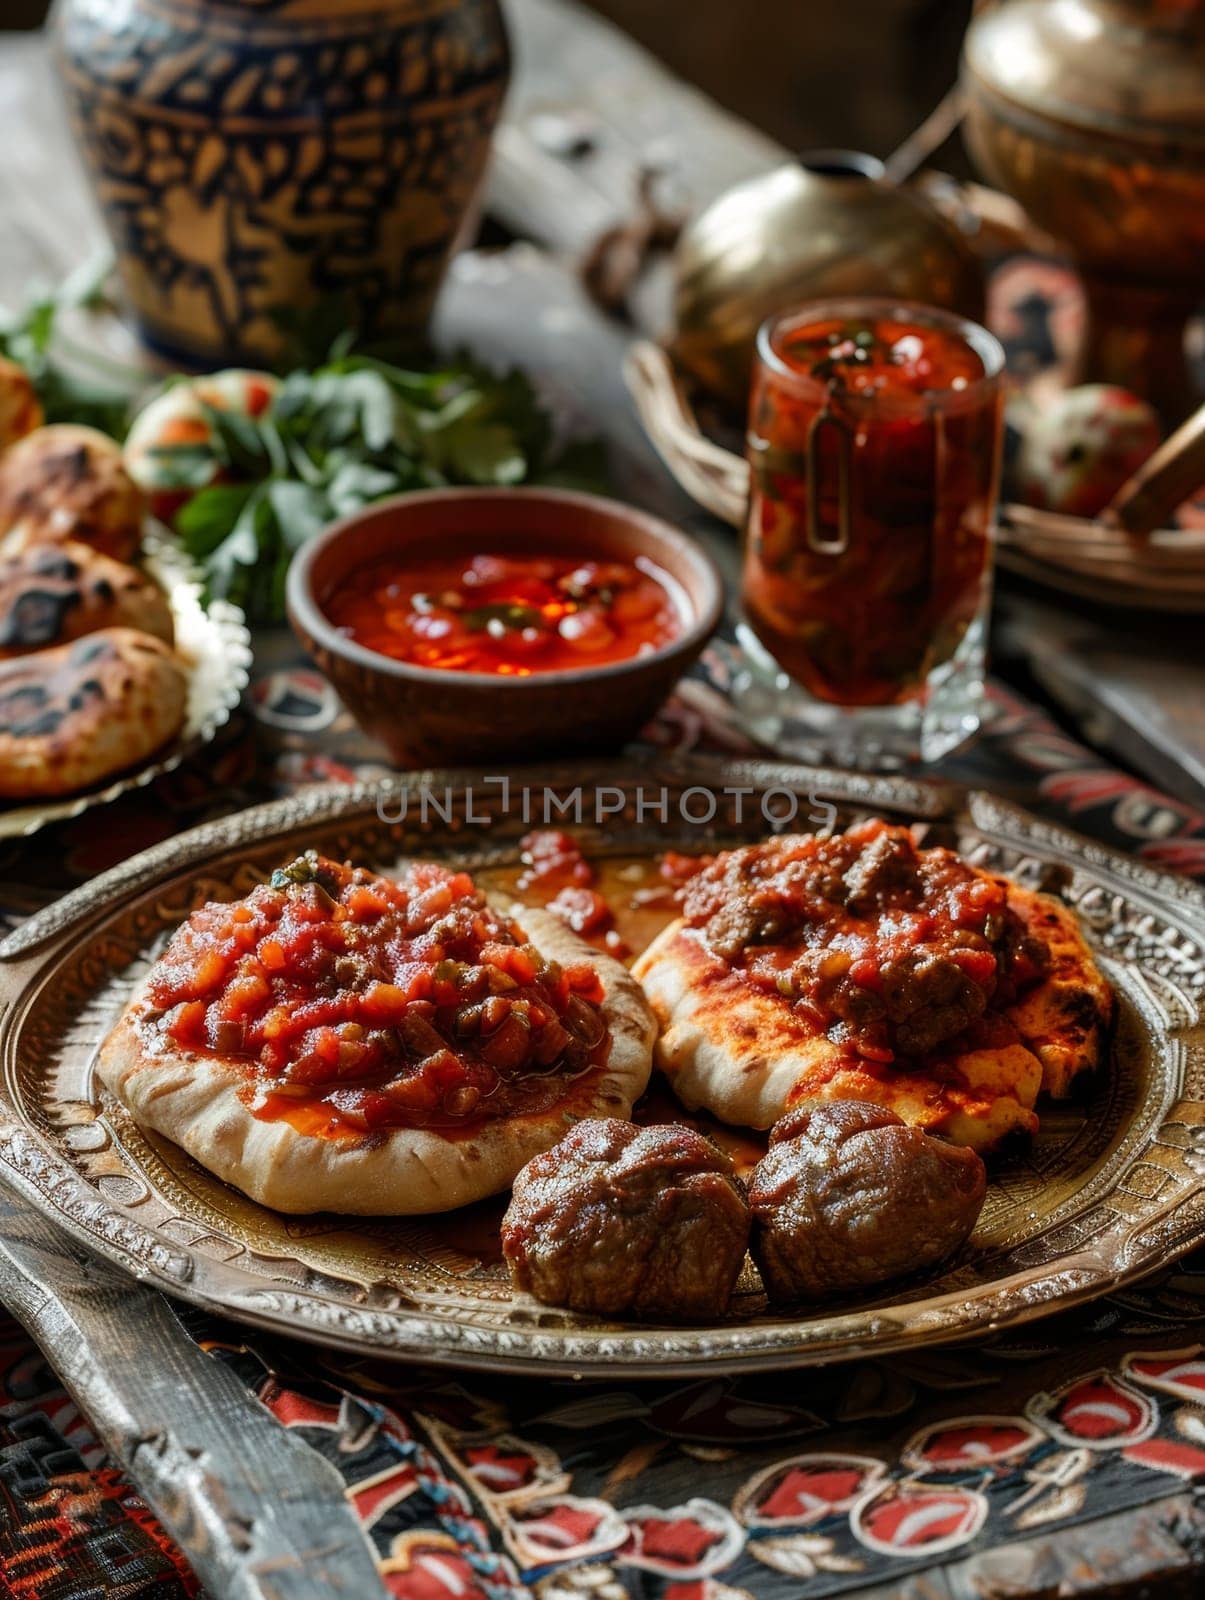 Libyan bazin, a hard dough served with a spicy tomato sauce and meat, presented on a traditional serving tray. This rustic and satisfying dish reflects the unique culinary heritage of North Africa